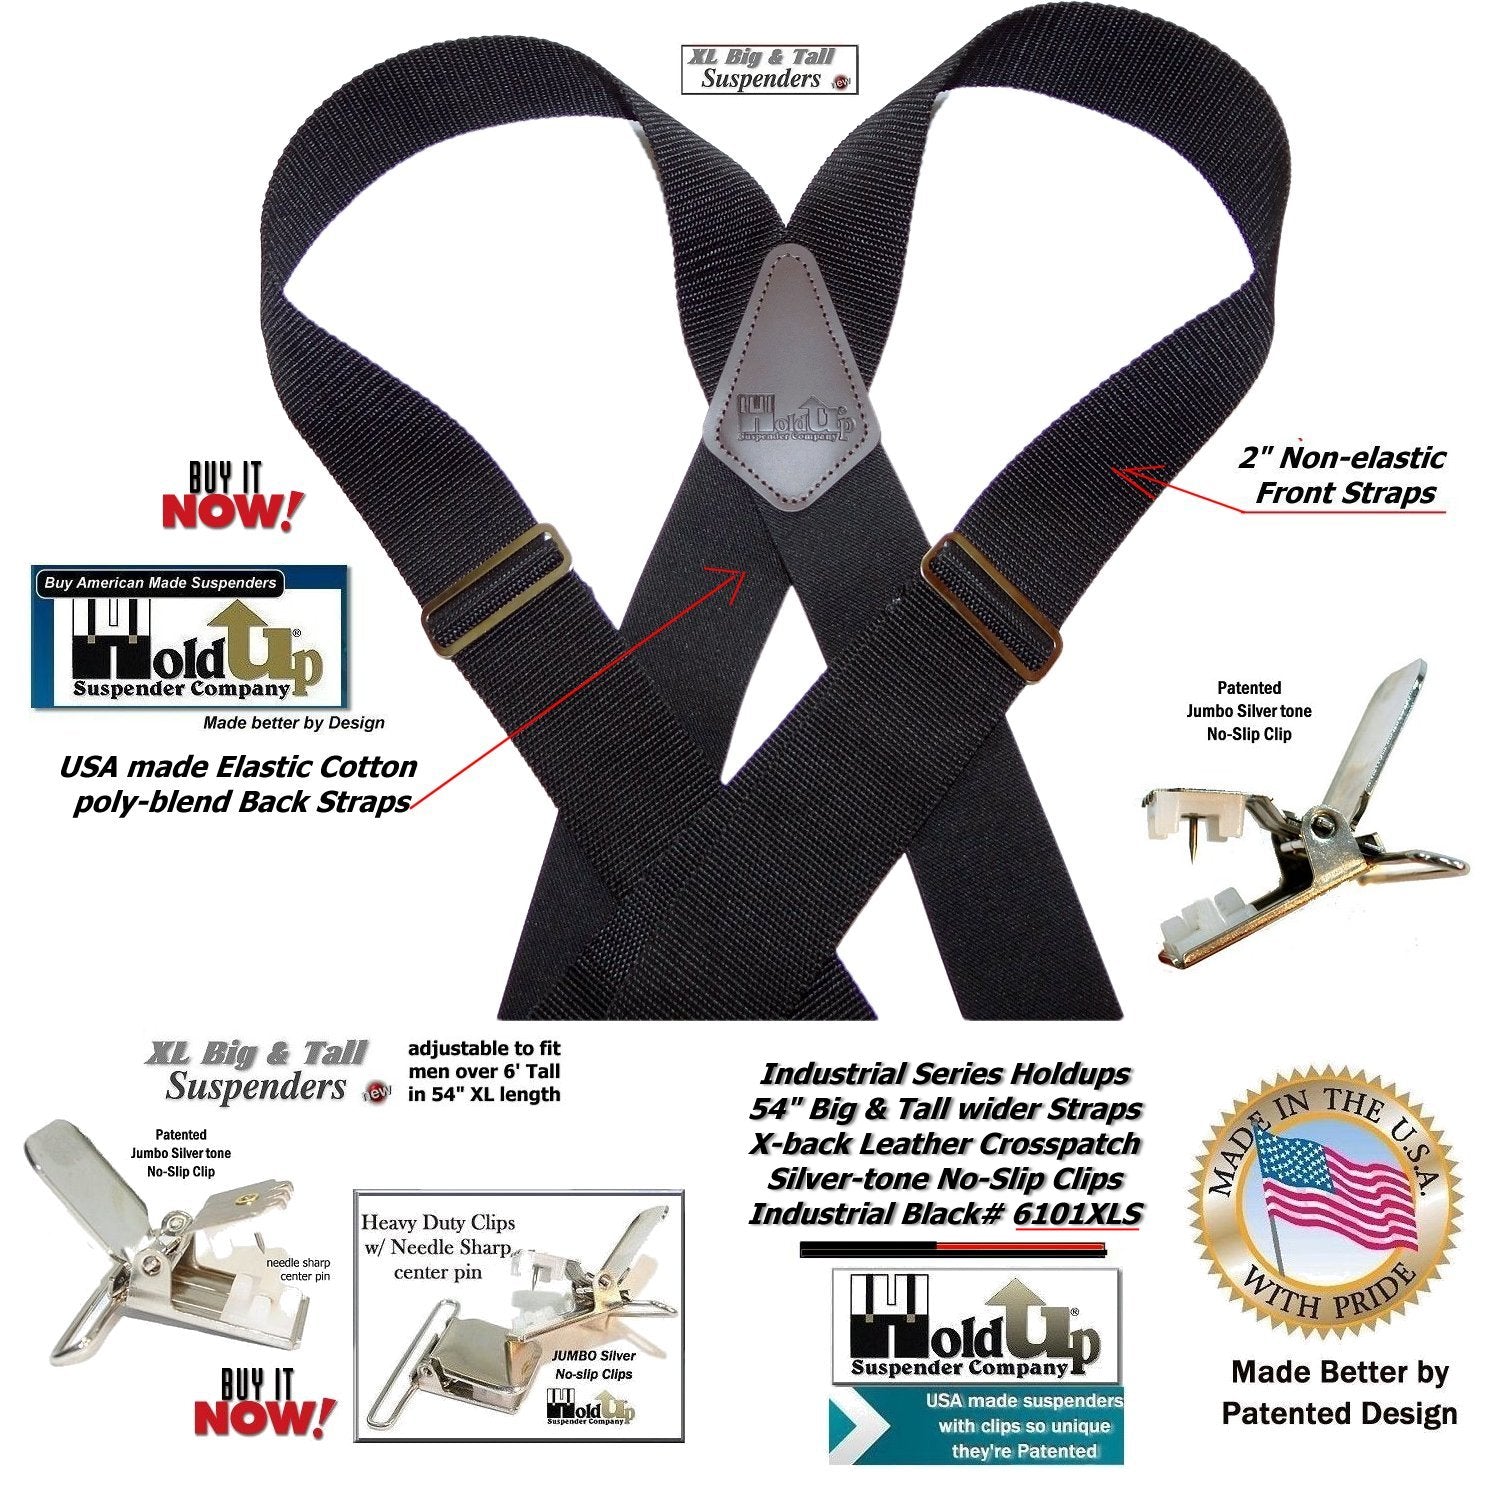 Holdup Silver No-Slip replacement suspender patented clips